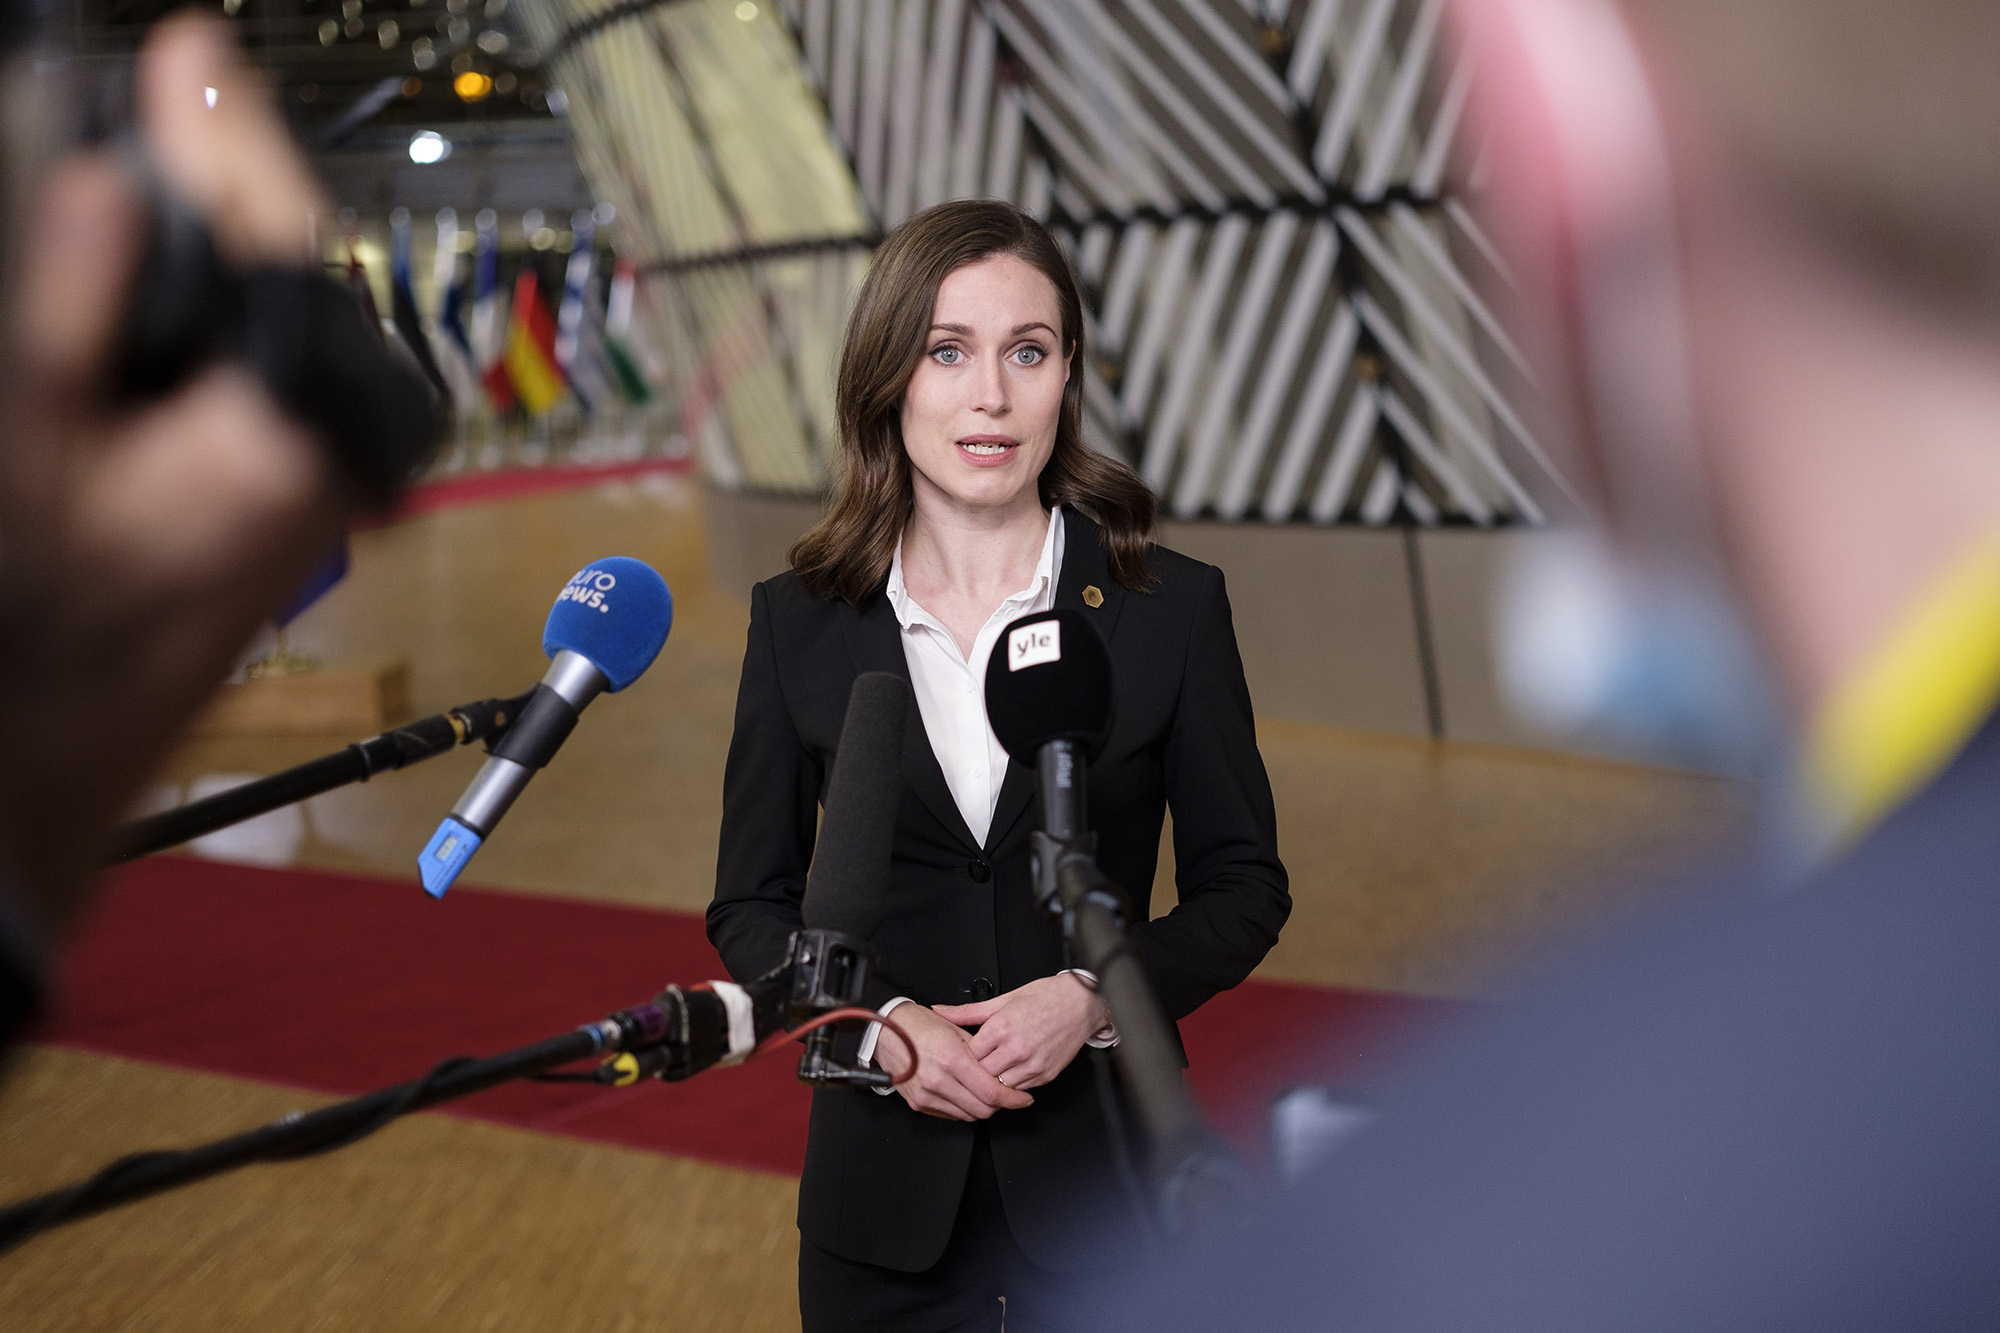 Finish Prime Minister Sanna Marin talks to the media as she arrives at the EU Council headquarters for an EU Summit on the situation in Ukraine on February 24, in Brussels, Belgium.